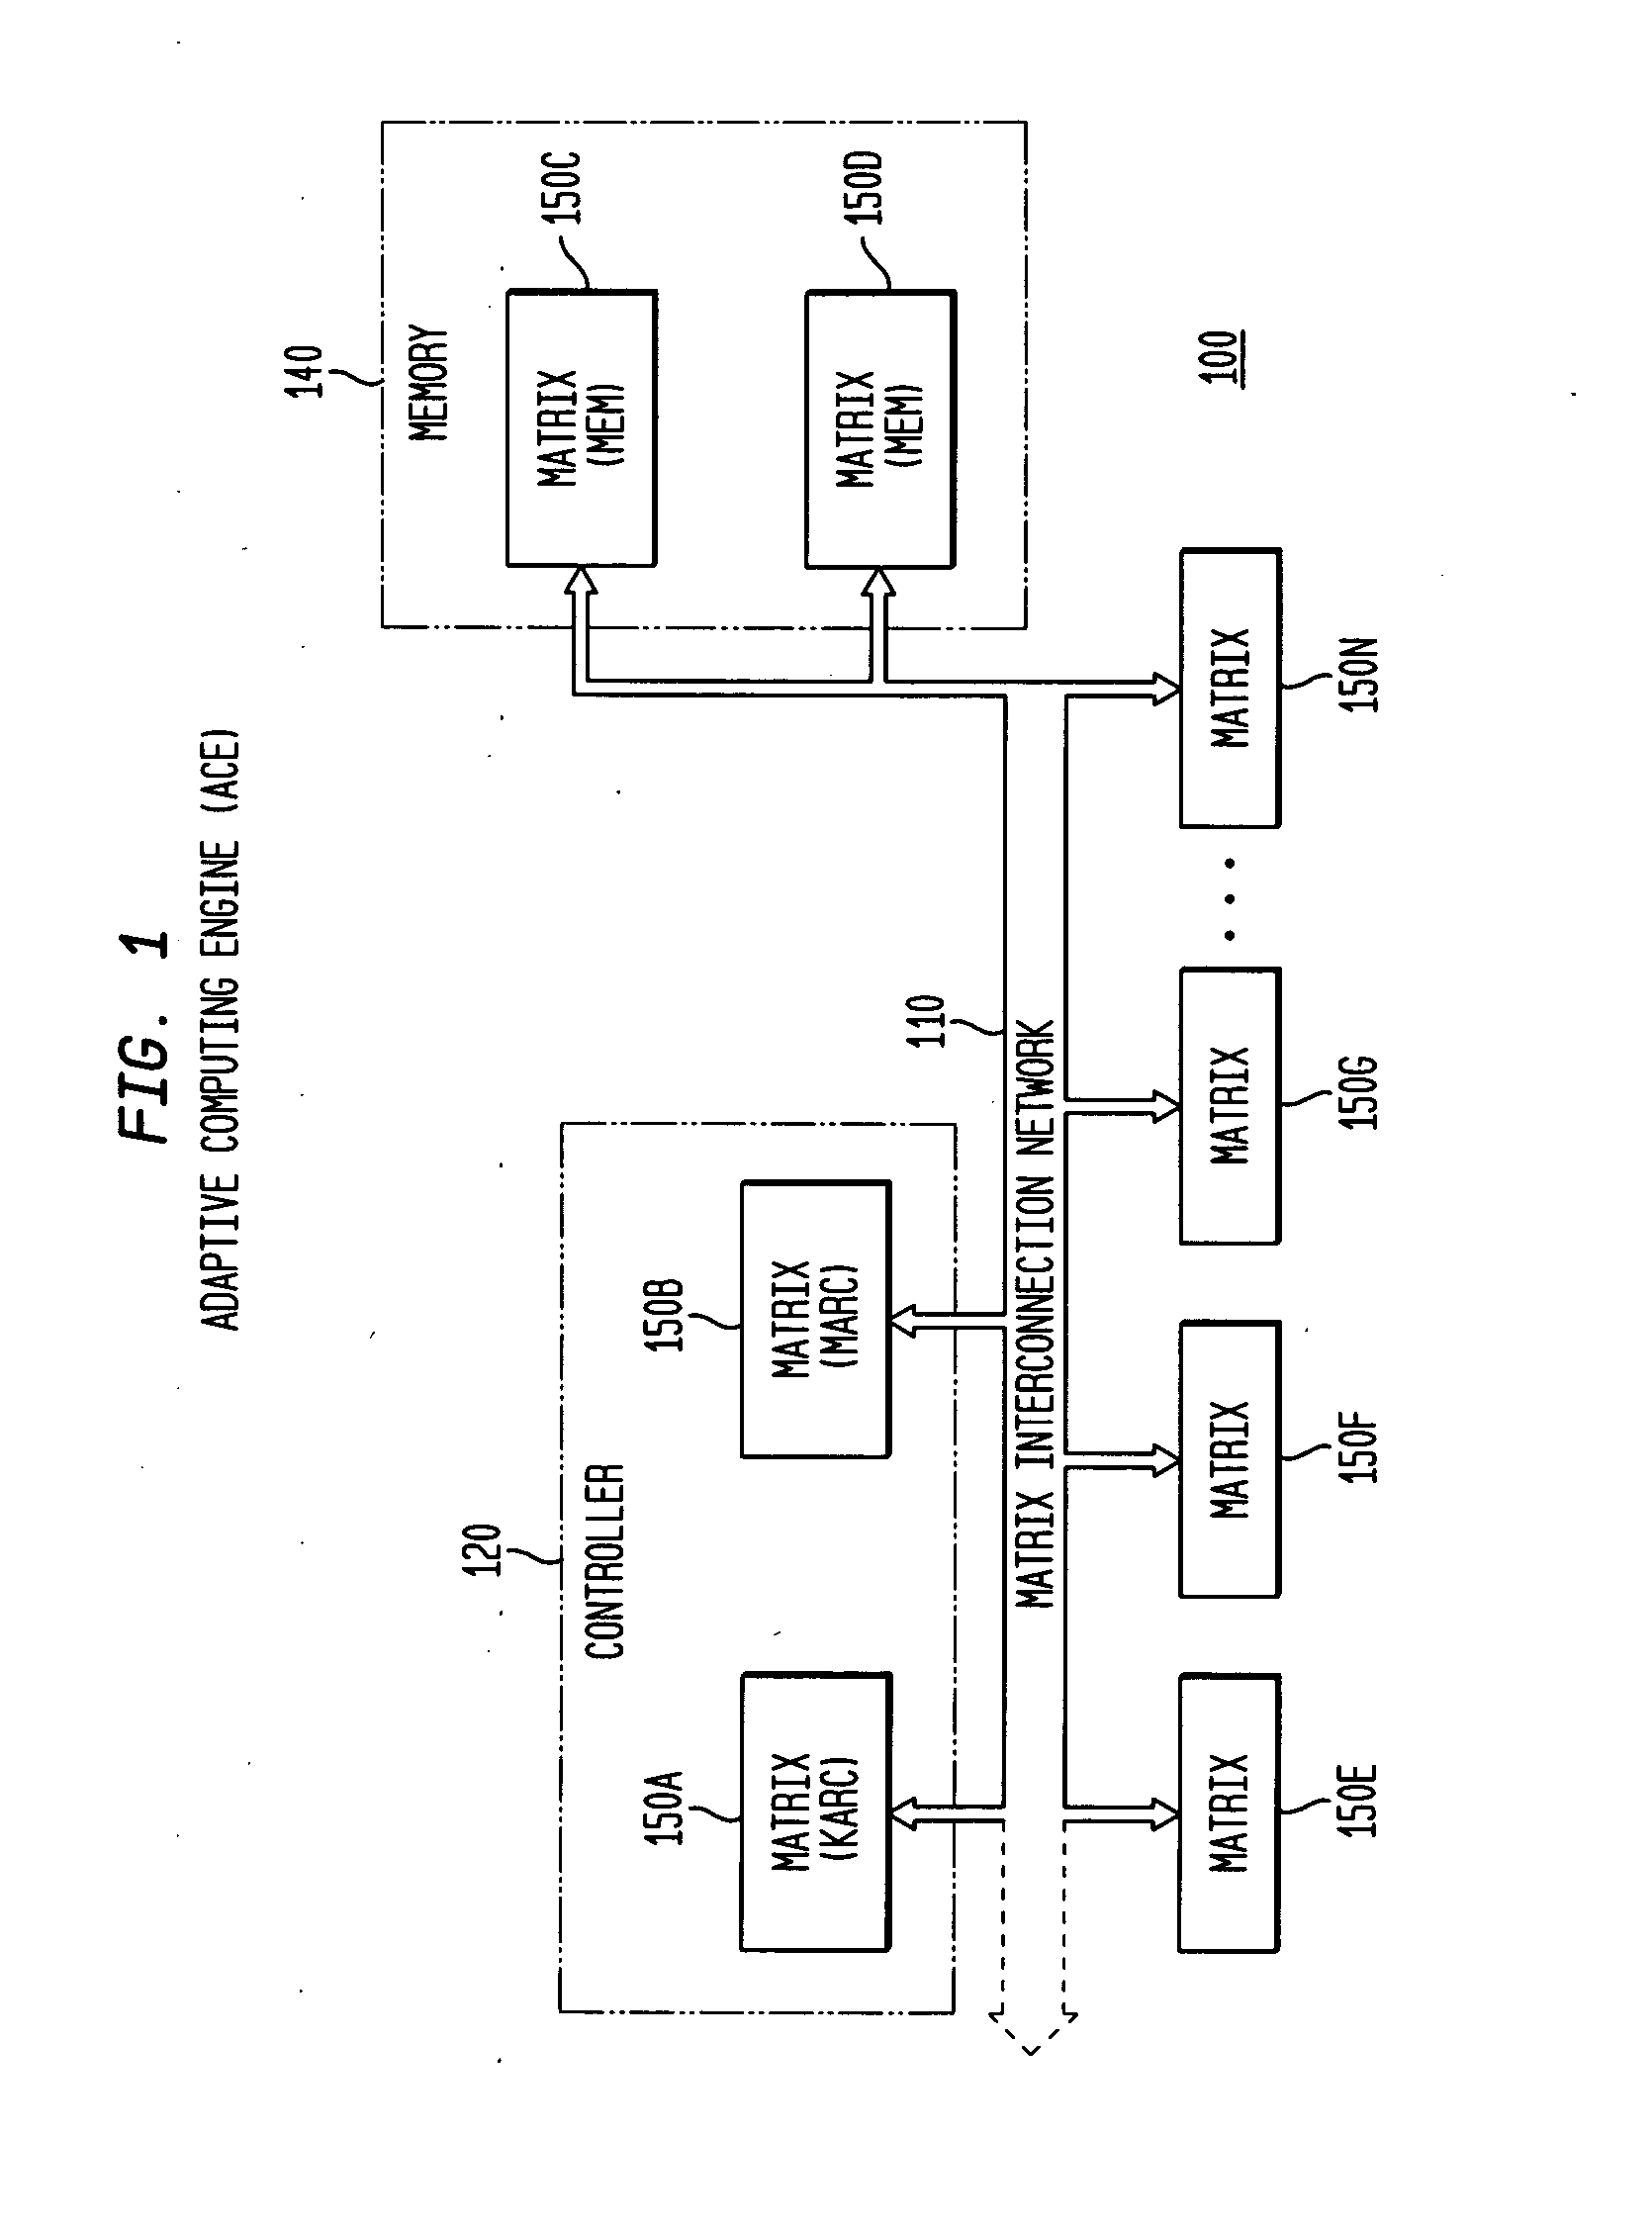 Internal synchronization control for adaptive integrated circuitry